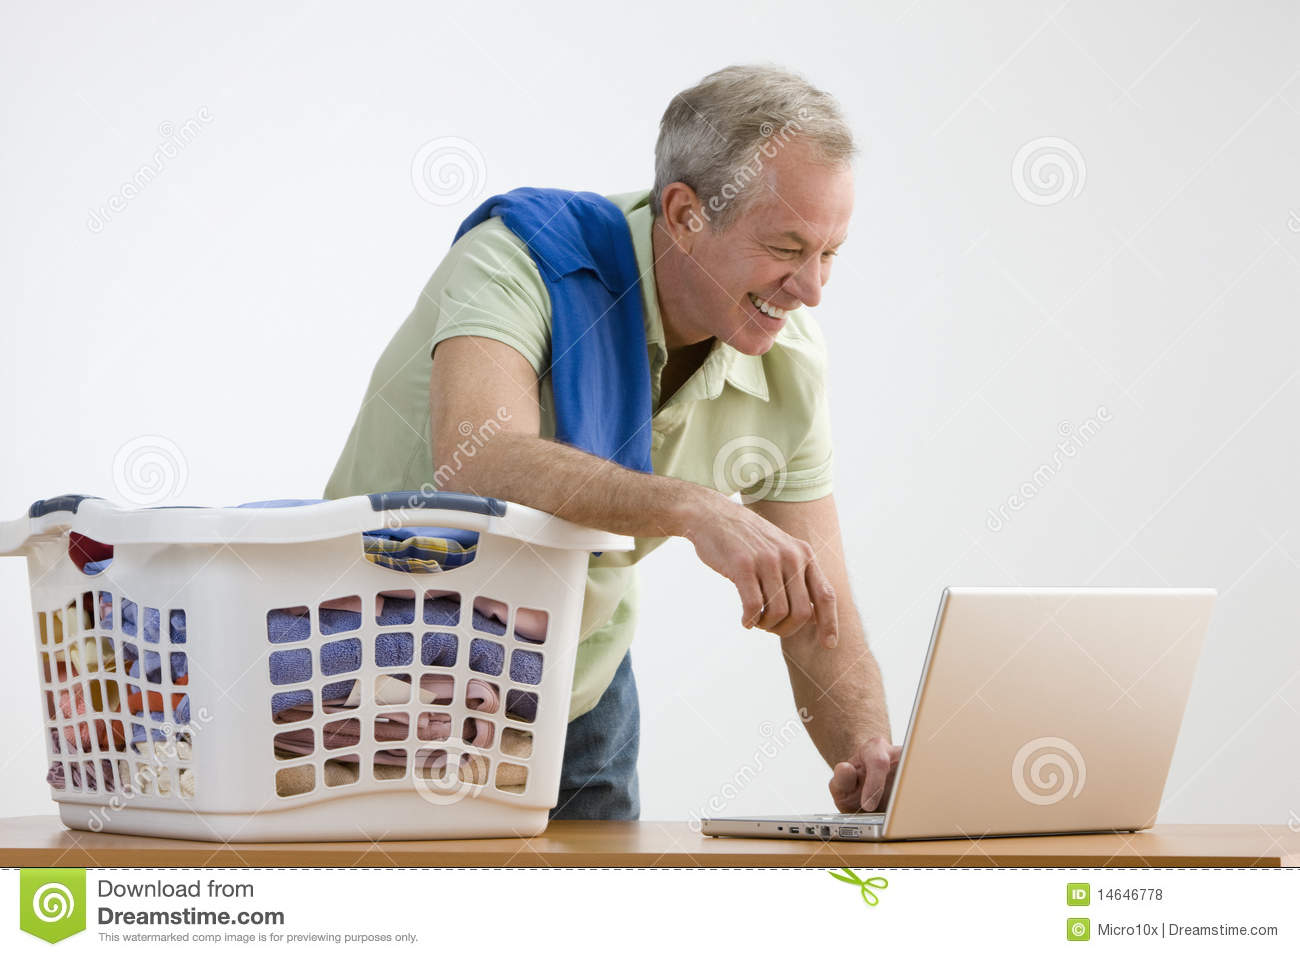 Man Is Working On A Laptop While He Folds Laundry  He Is Smiling And    